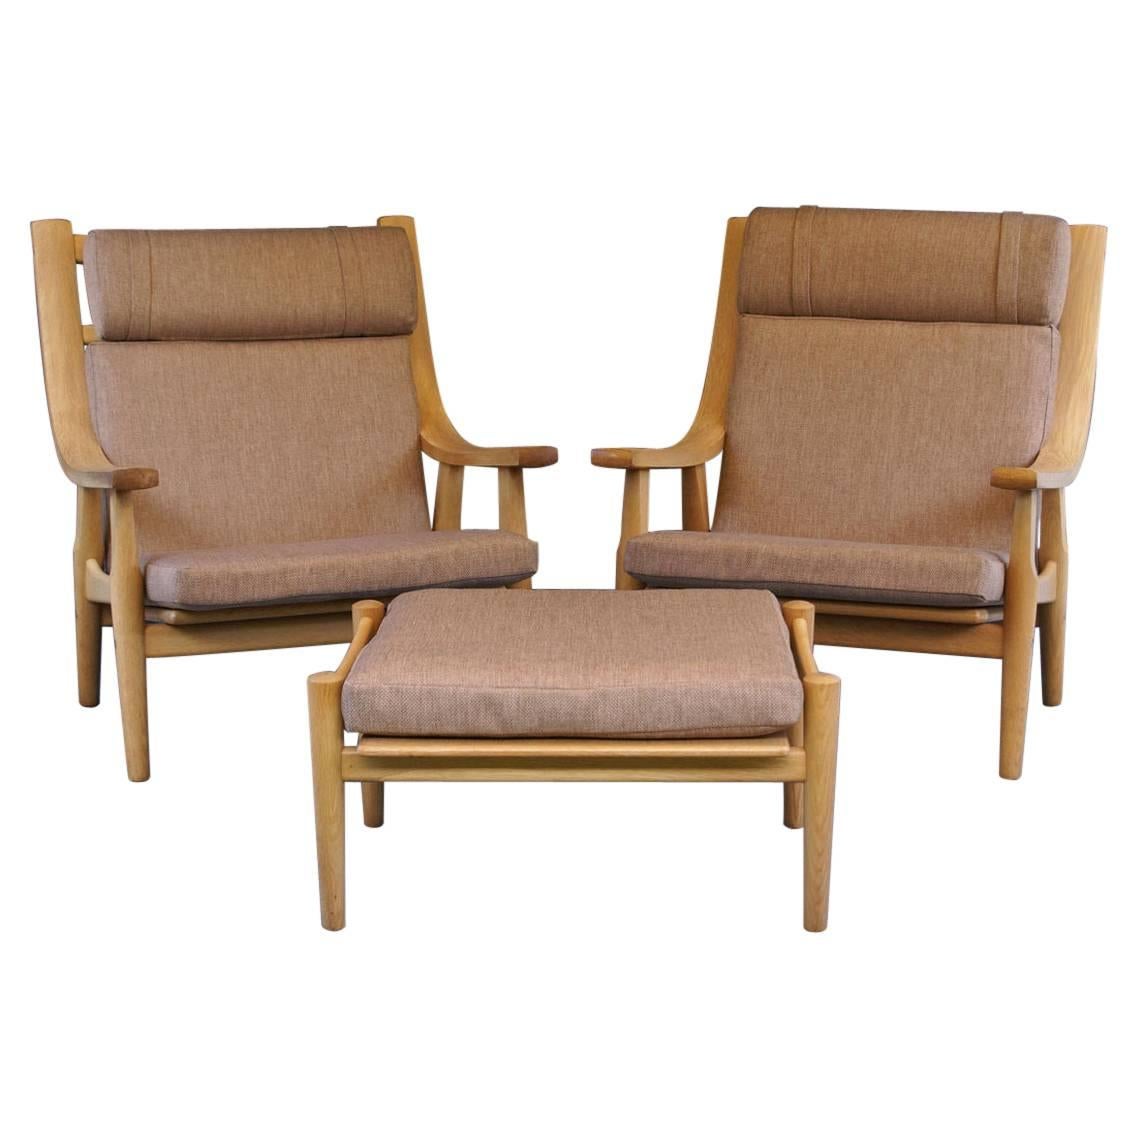 Pair of High Back Oak GE530 Chairs with Ottomans by Hans J. Wegner for GETAMA